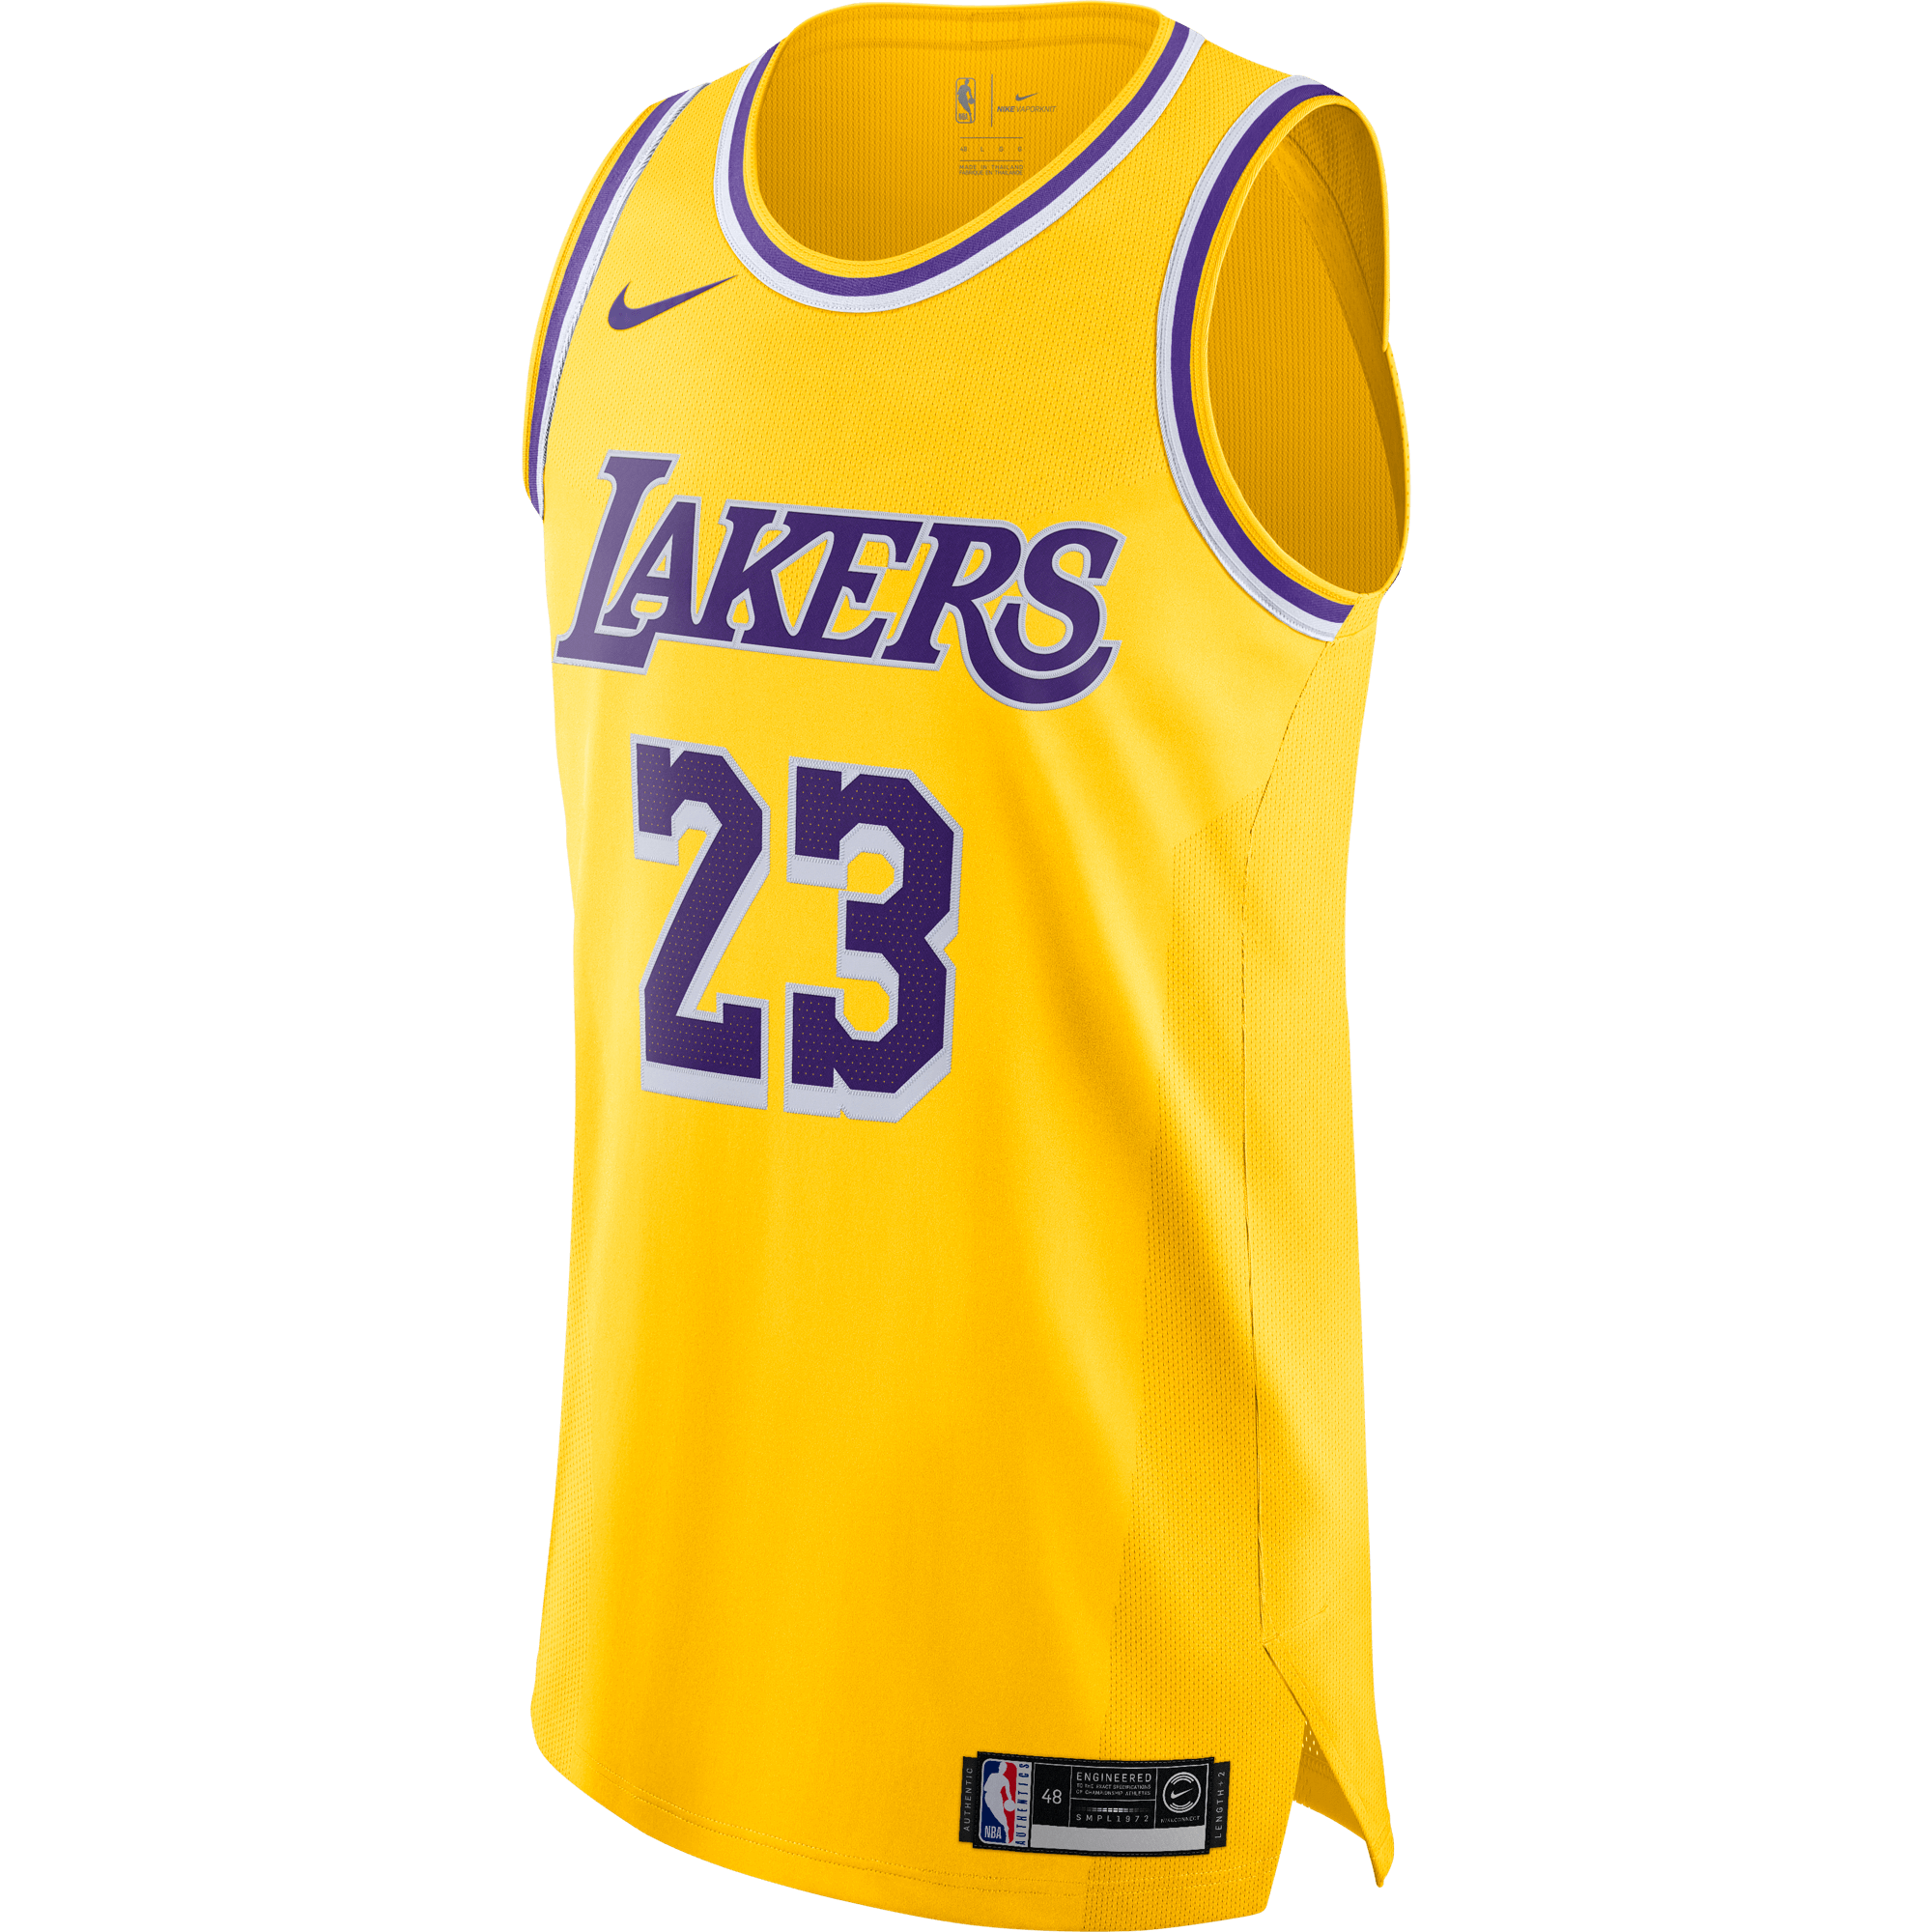 Lakers Jersey Png PNG Image Collection